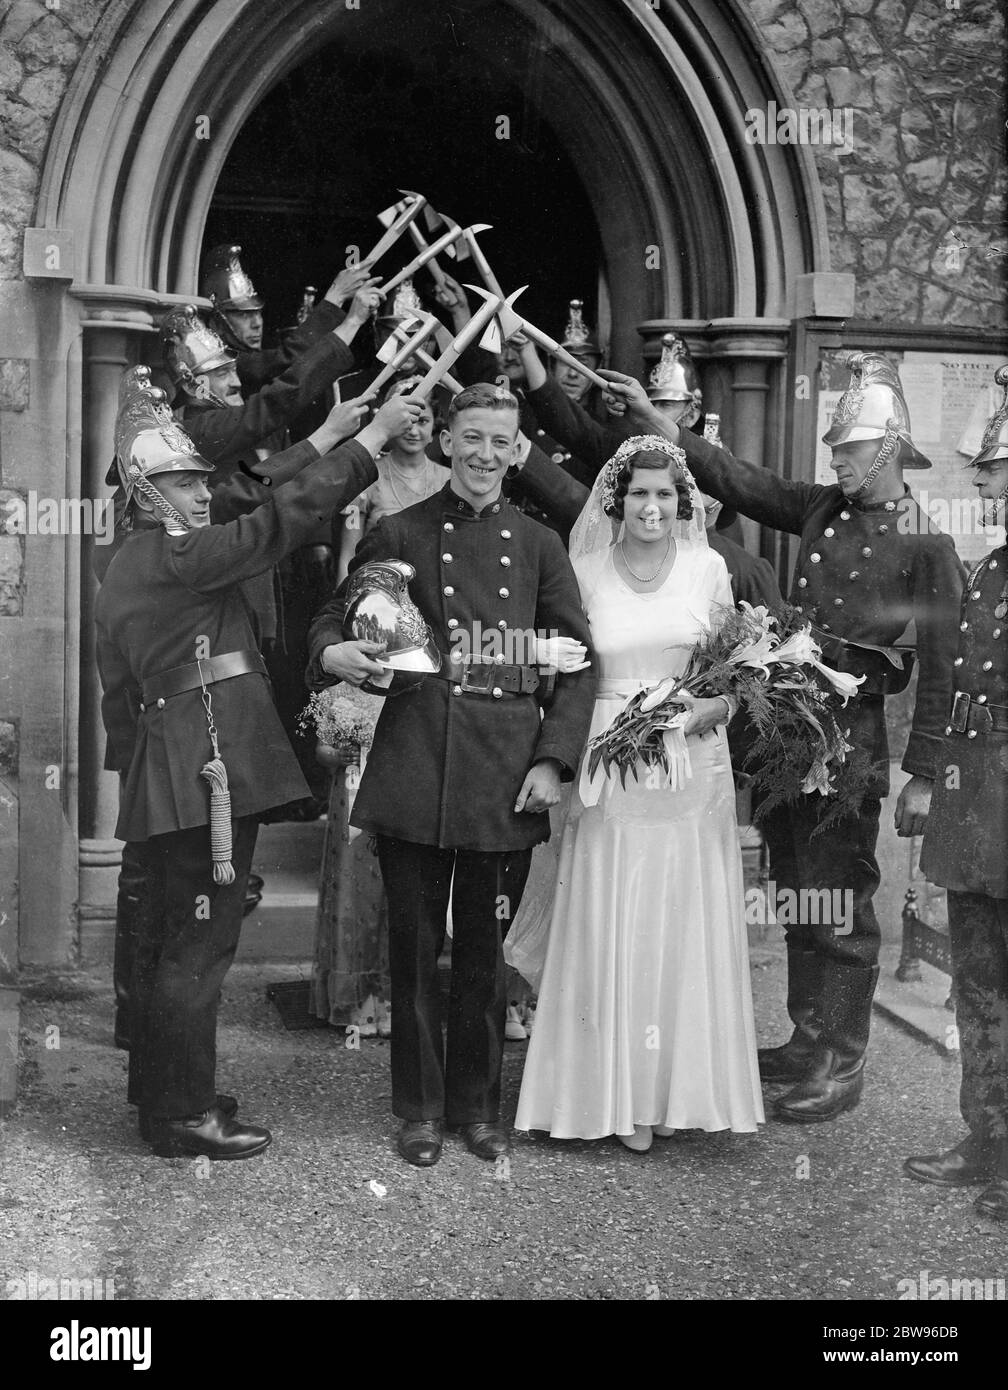 Teddington fire brigade form archway of axes and hoses at wedding of fireman at Teddington . The Teddington Fire Brigade formed an archway of axes and hoses when they acted of honour at the wedding of Fireman F Hathaway , one of their members and Miss A Audus . The bride and groom leaving Christ Church . 13 August 1932 Stock Photo